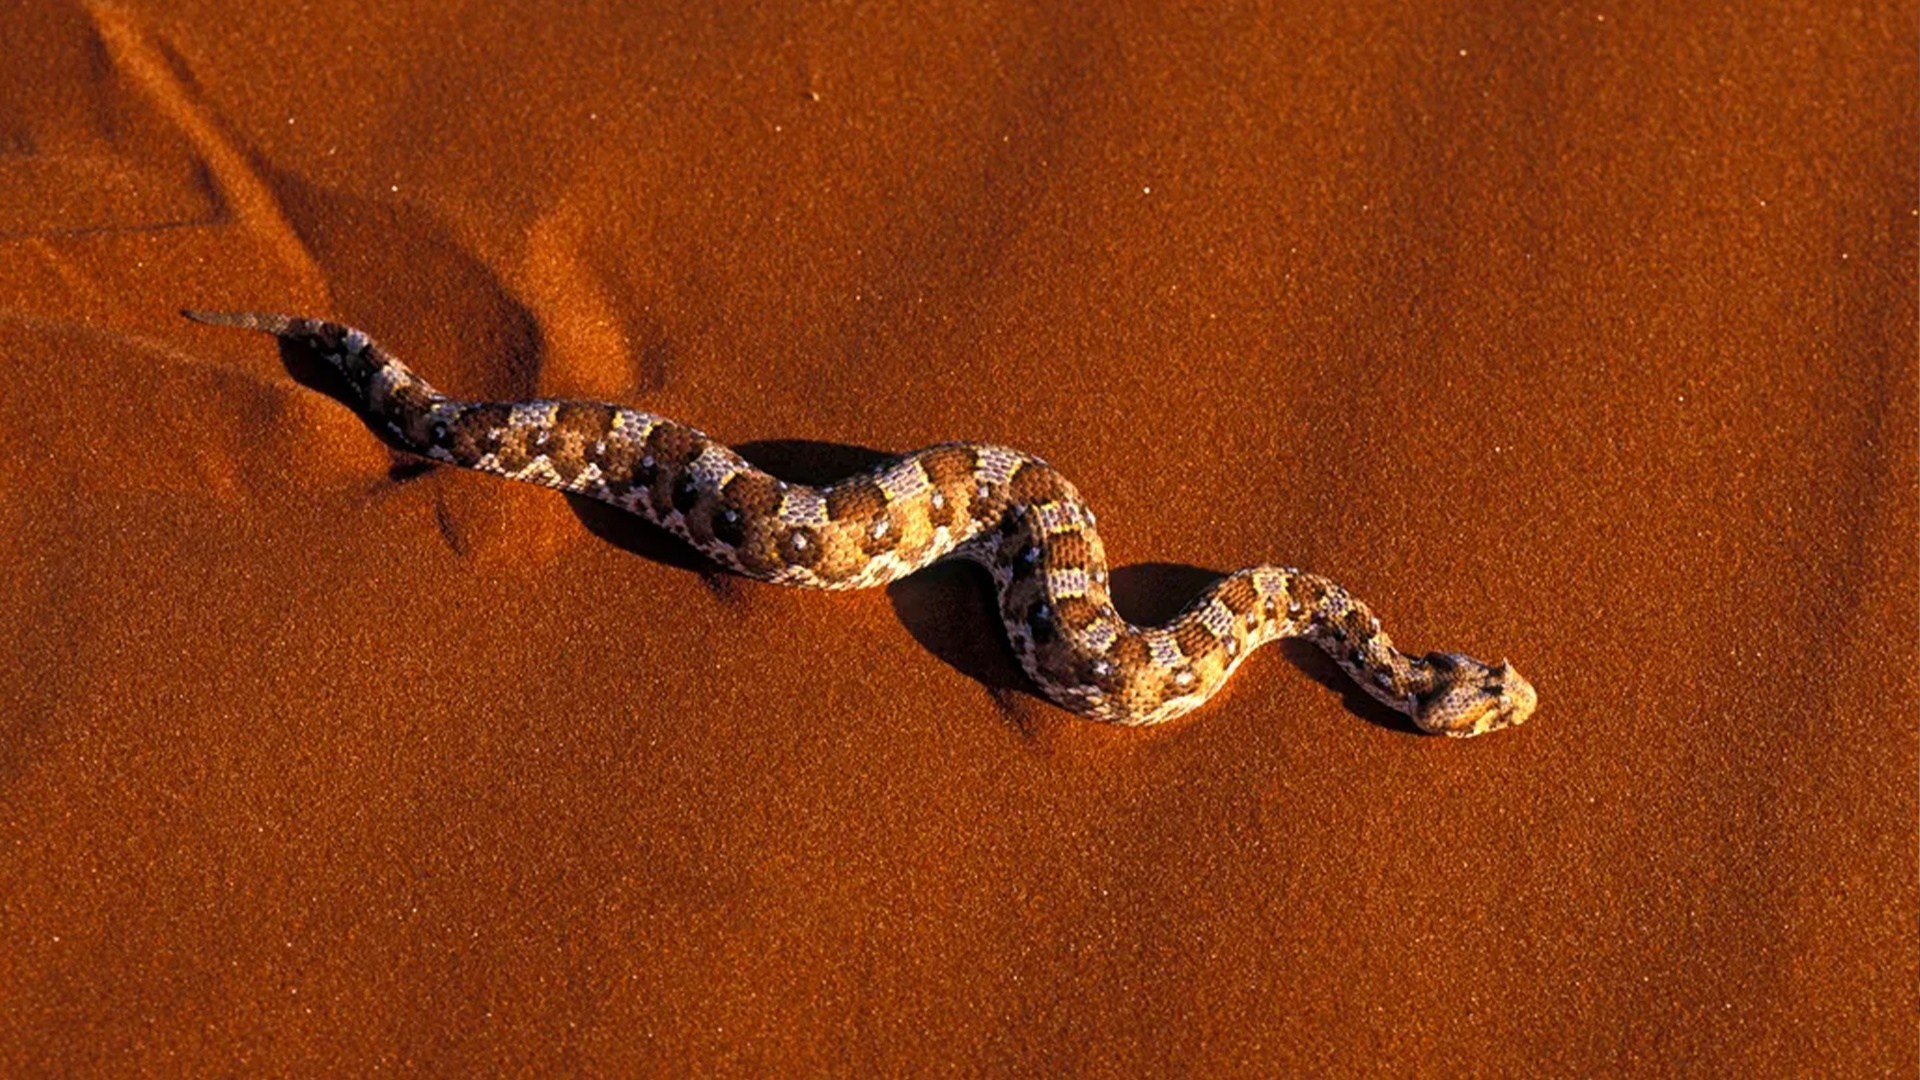 (Wonderful to recognize: The wriggling of the snake. (Image: BBC))